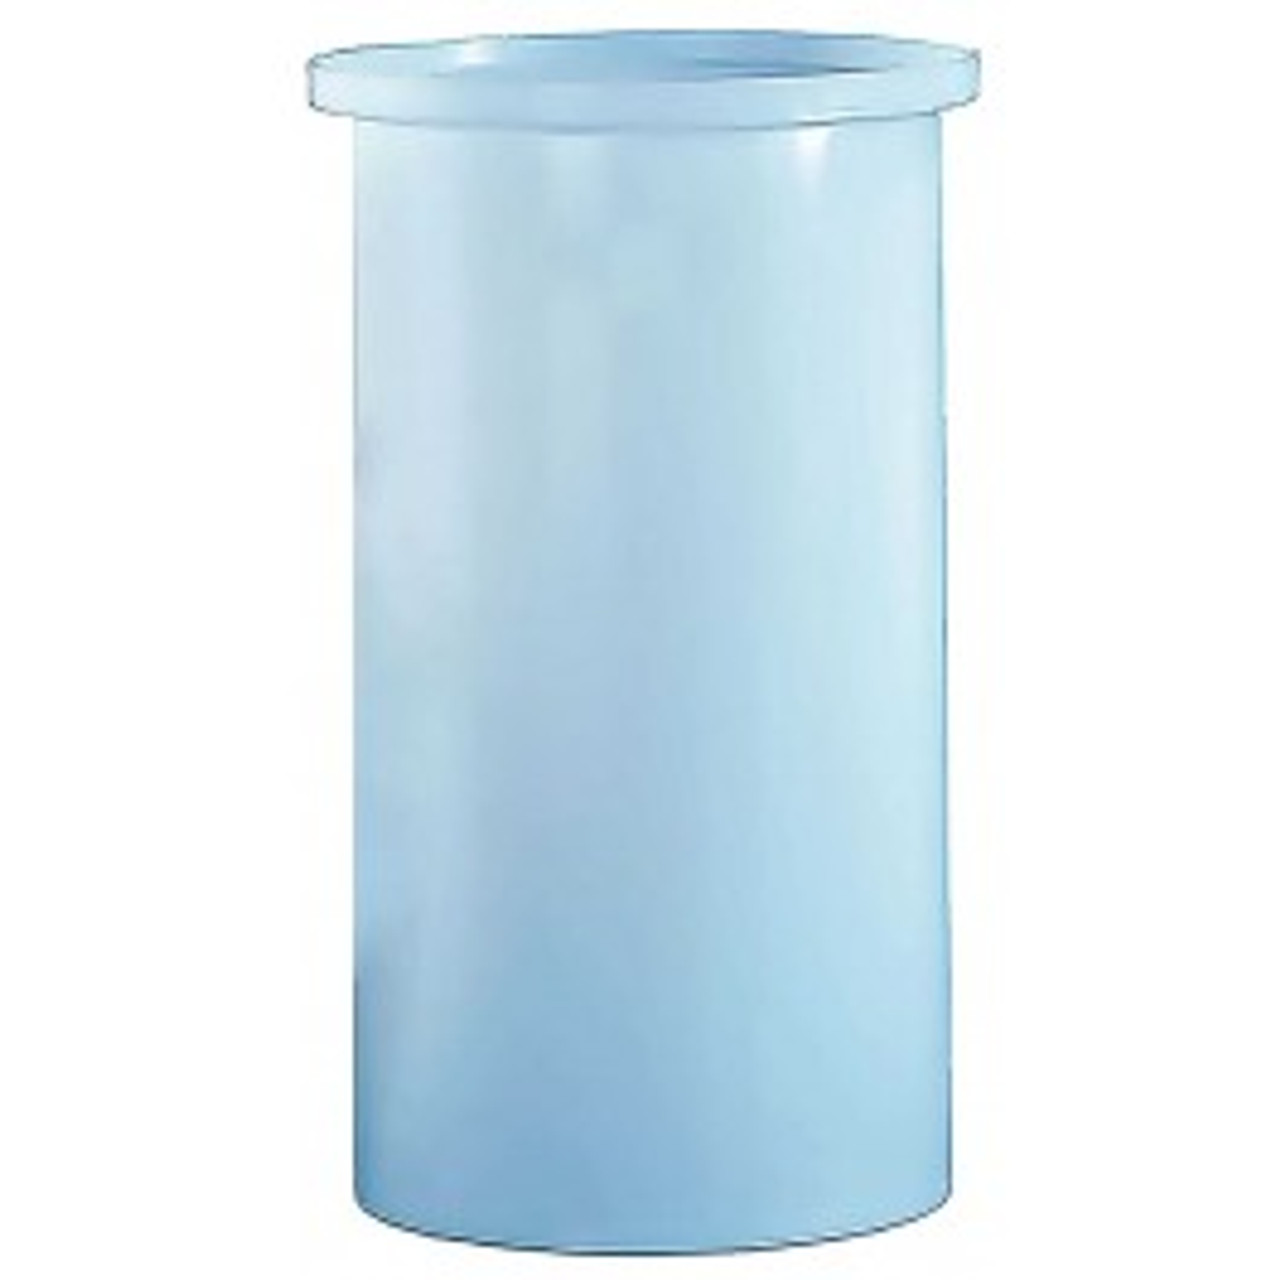 An image of a 65 Gallon PE Chem-Tainer White Cylindrical Open Top Tank | TC2240AA